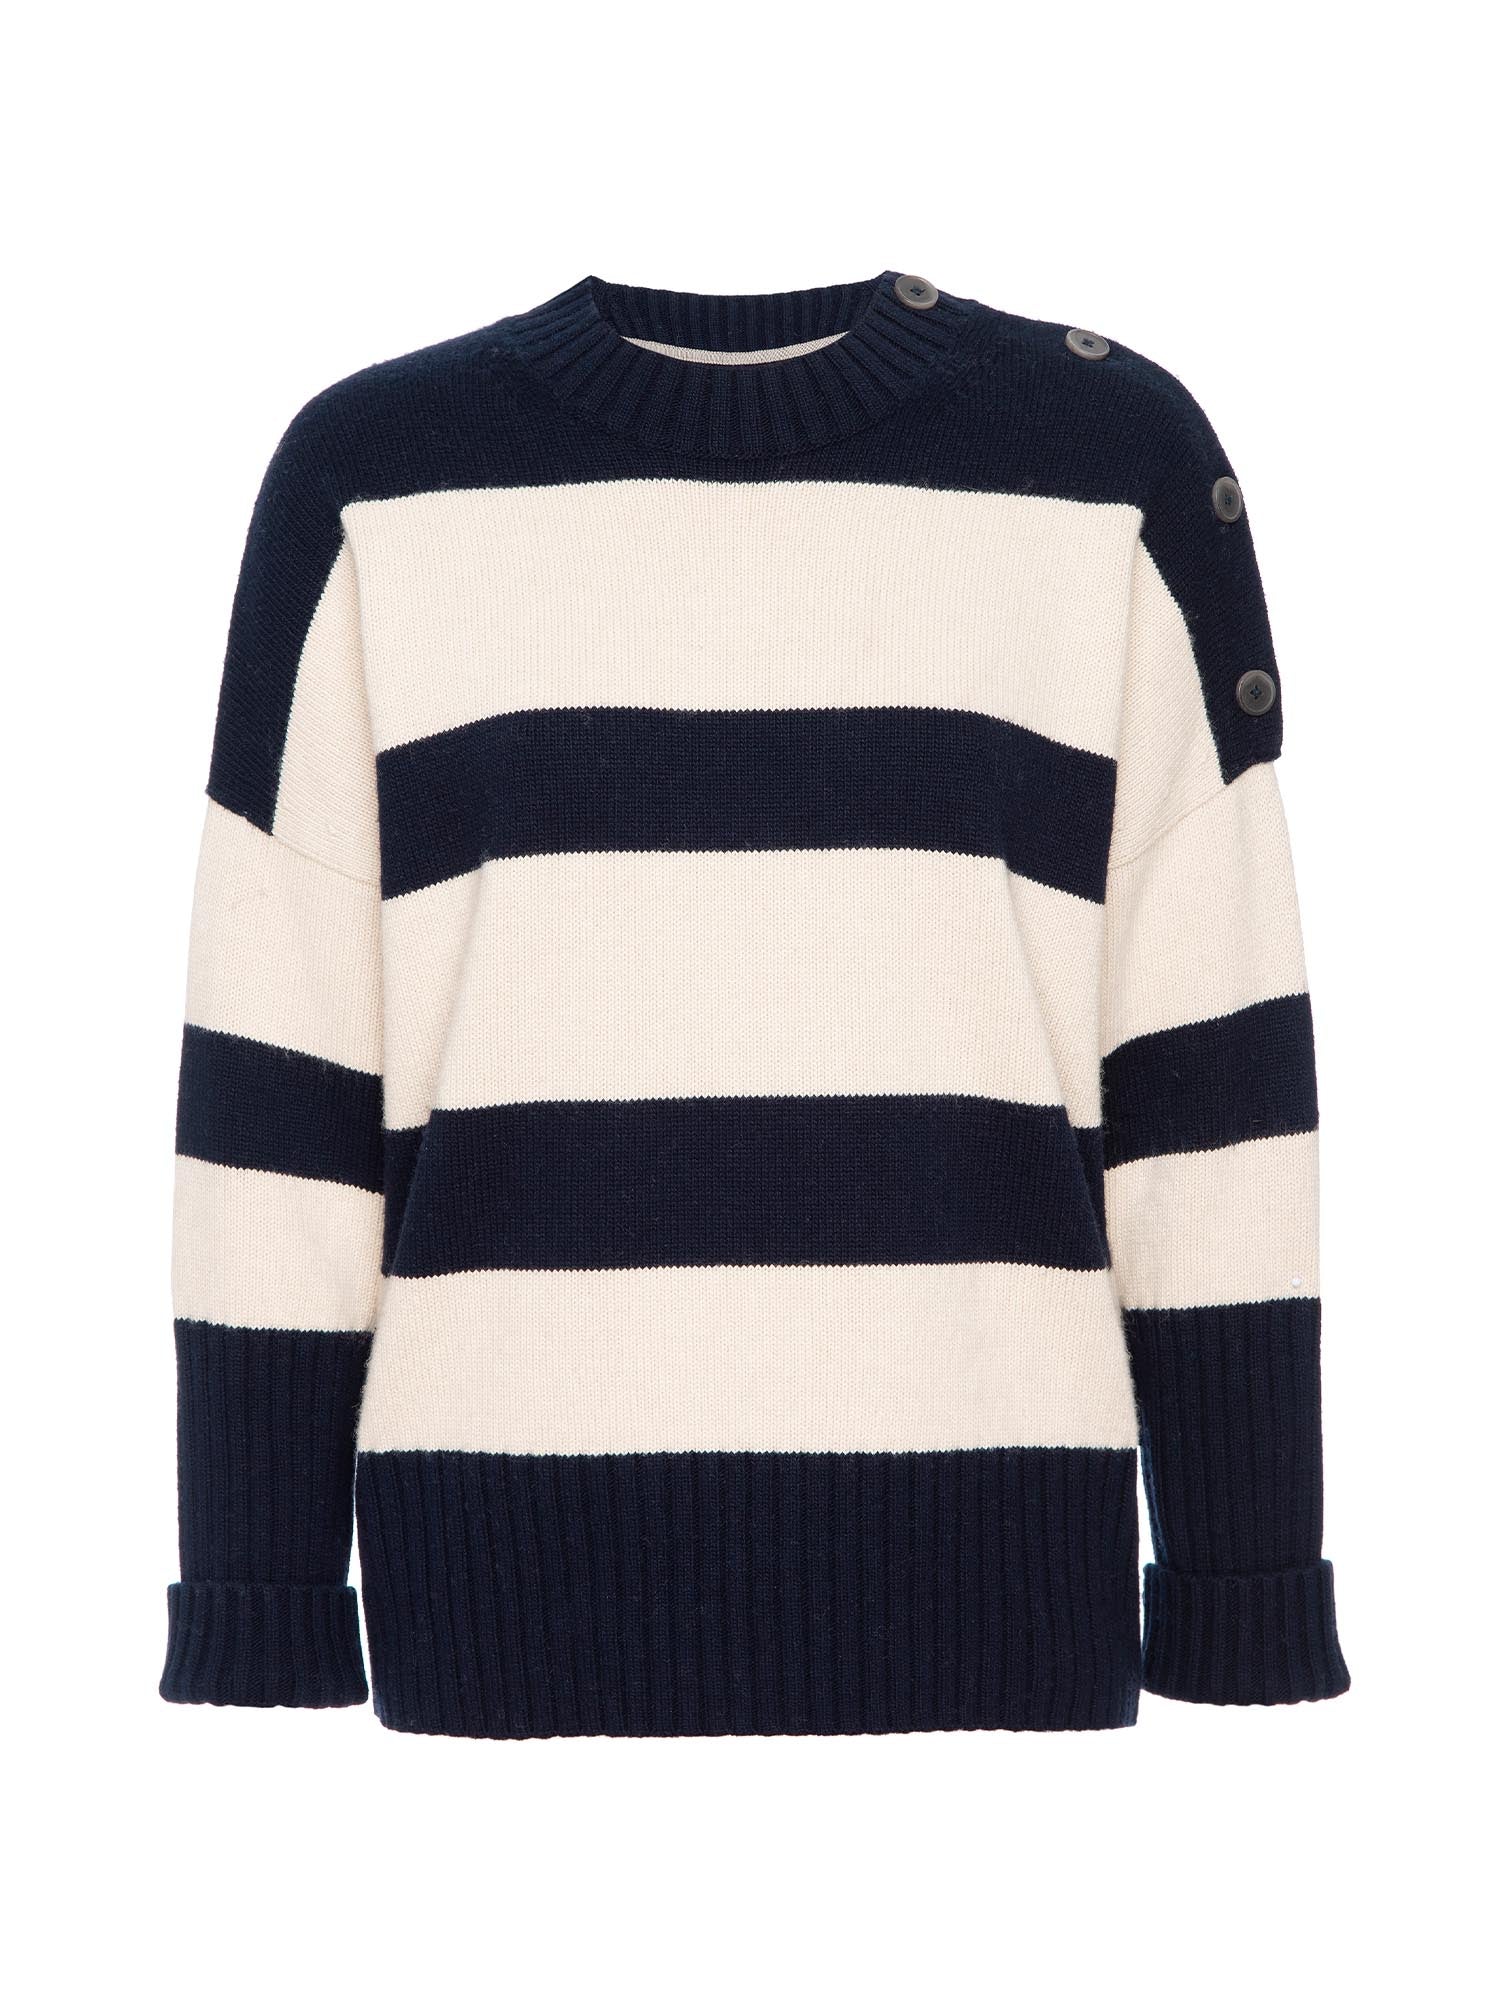 Cy navy and beige stripe crewneck sweater flat view